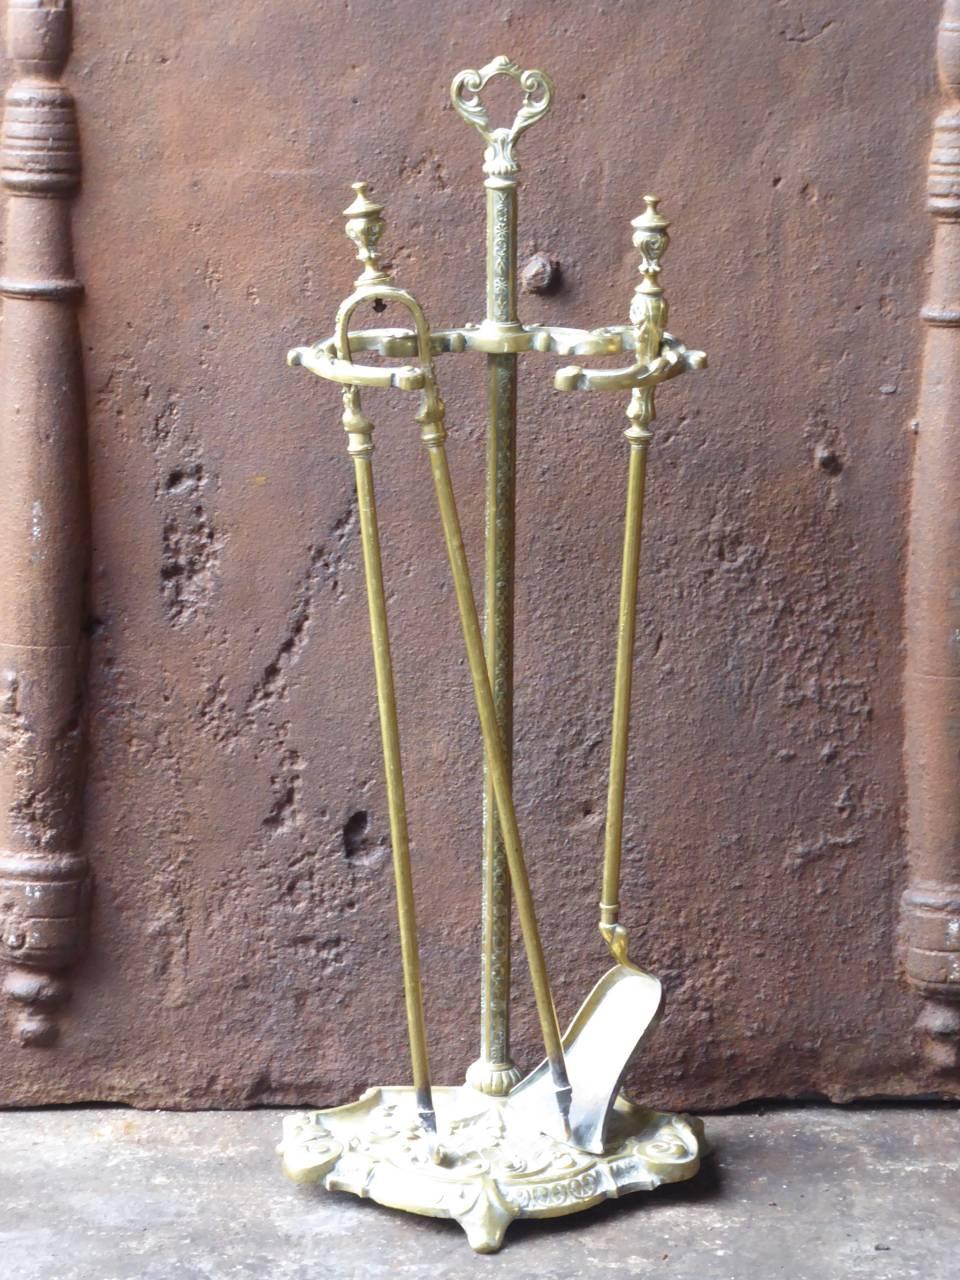 20th century French fireplace tools made of brass.

We have a unique and specialized collection of antique and used fireplace accessories consisting of more than 1000 listings at 1stdibs. Amongst others we always have 300+ firebacks, 250+ pairs of